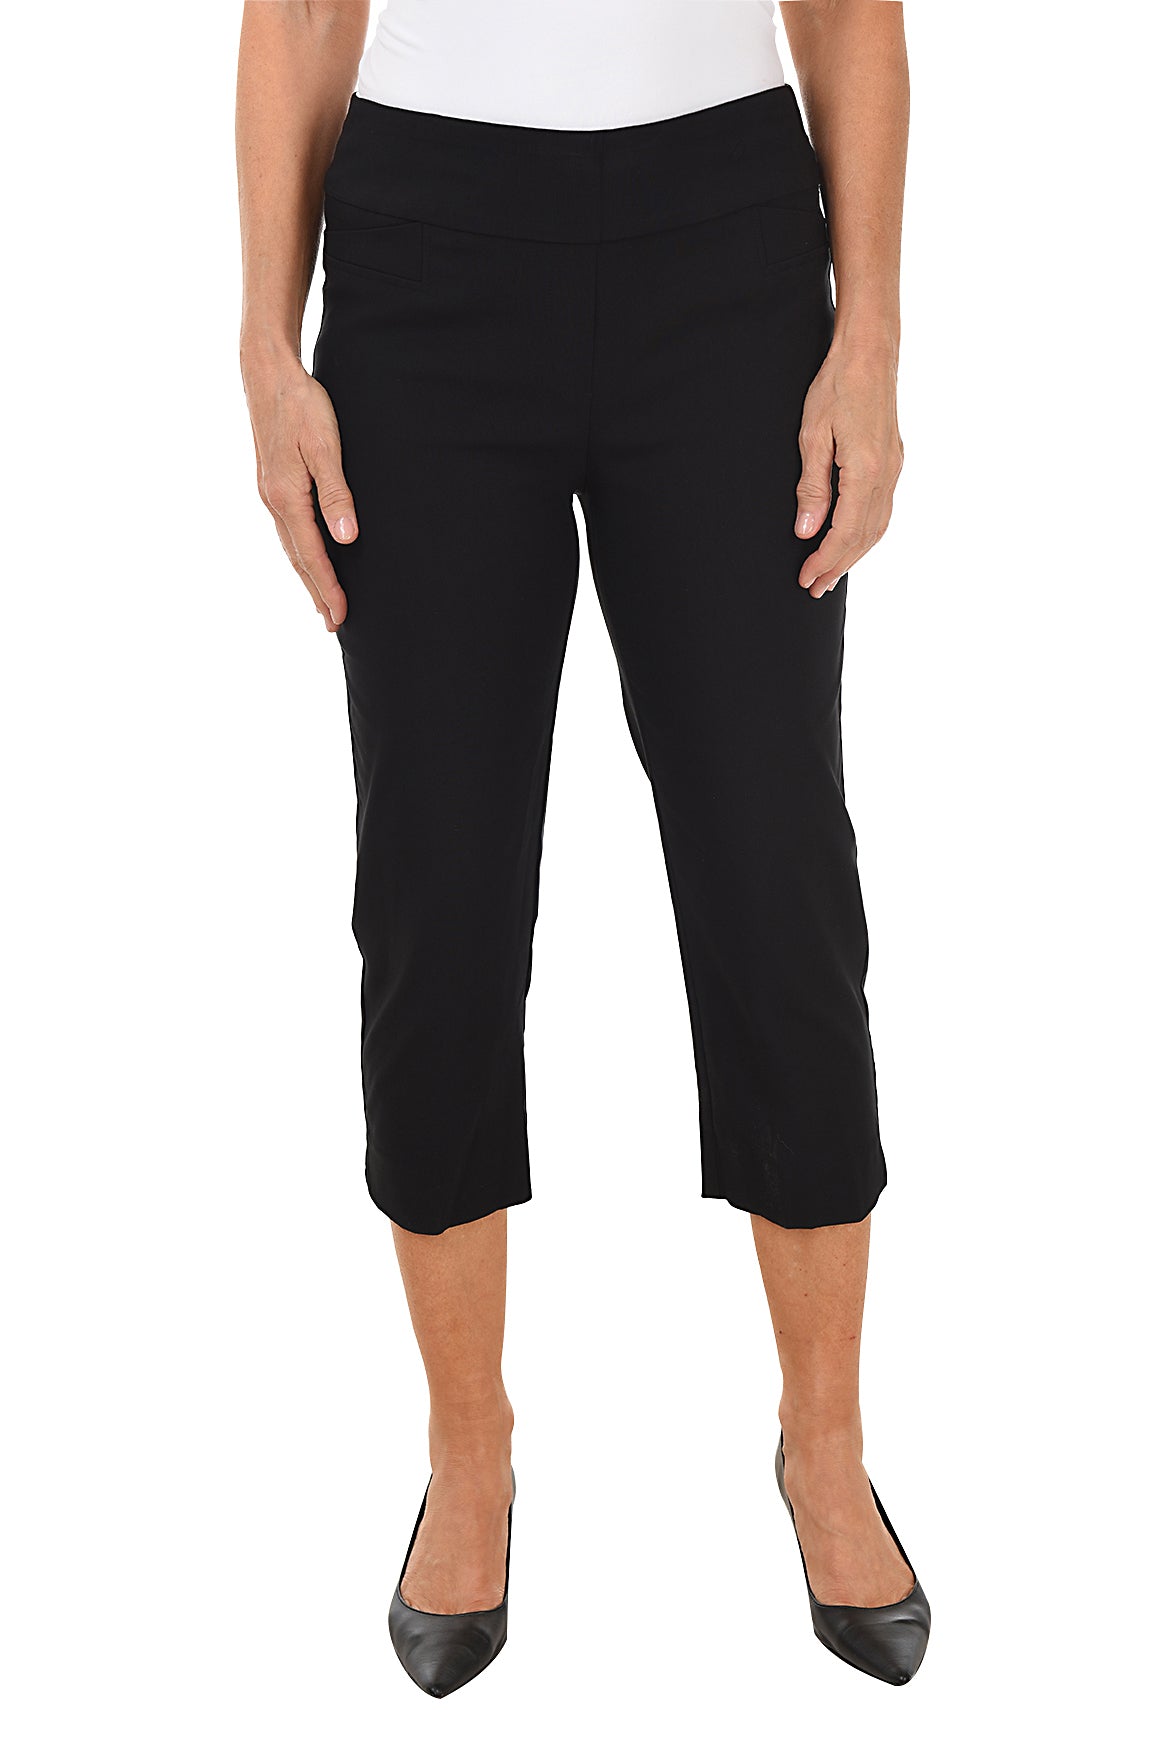 Petite Pull-On Ultimate Fit Crop Pant